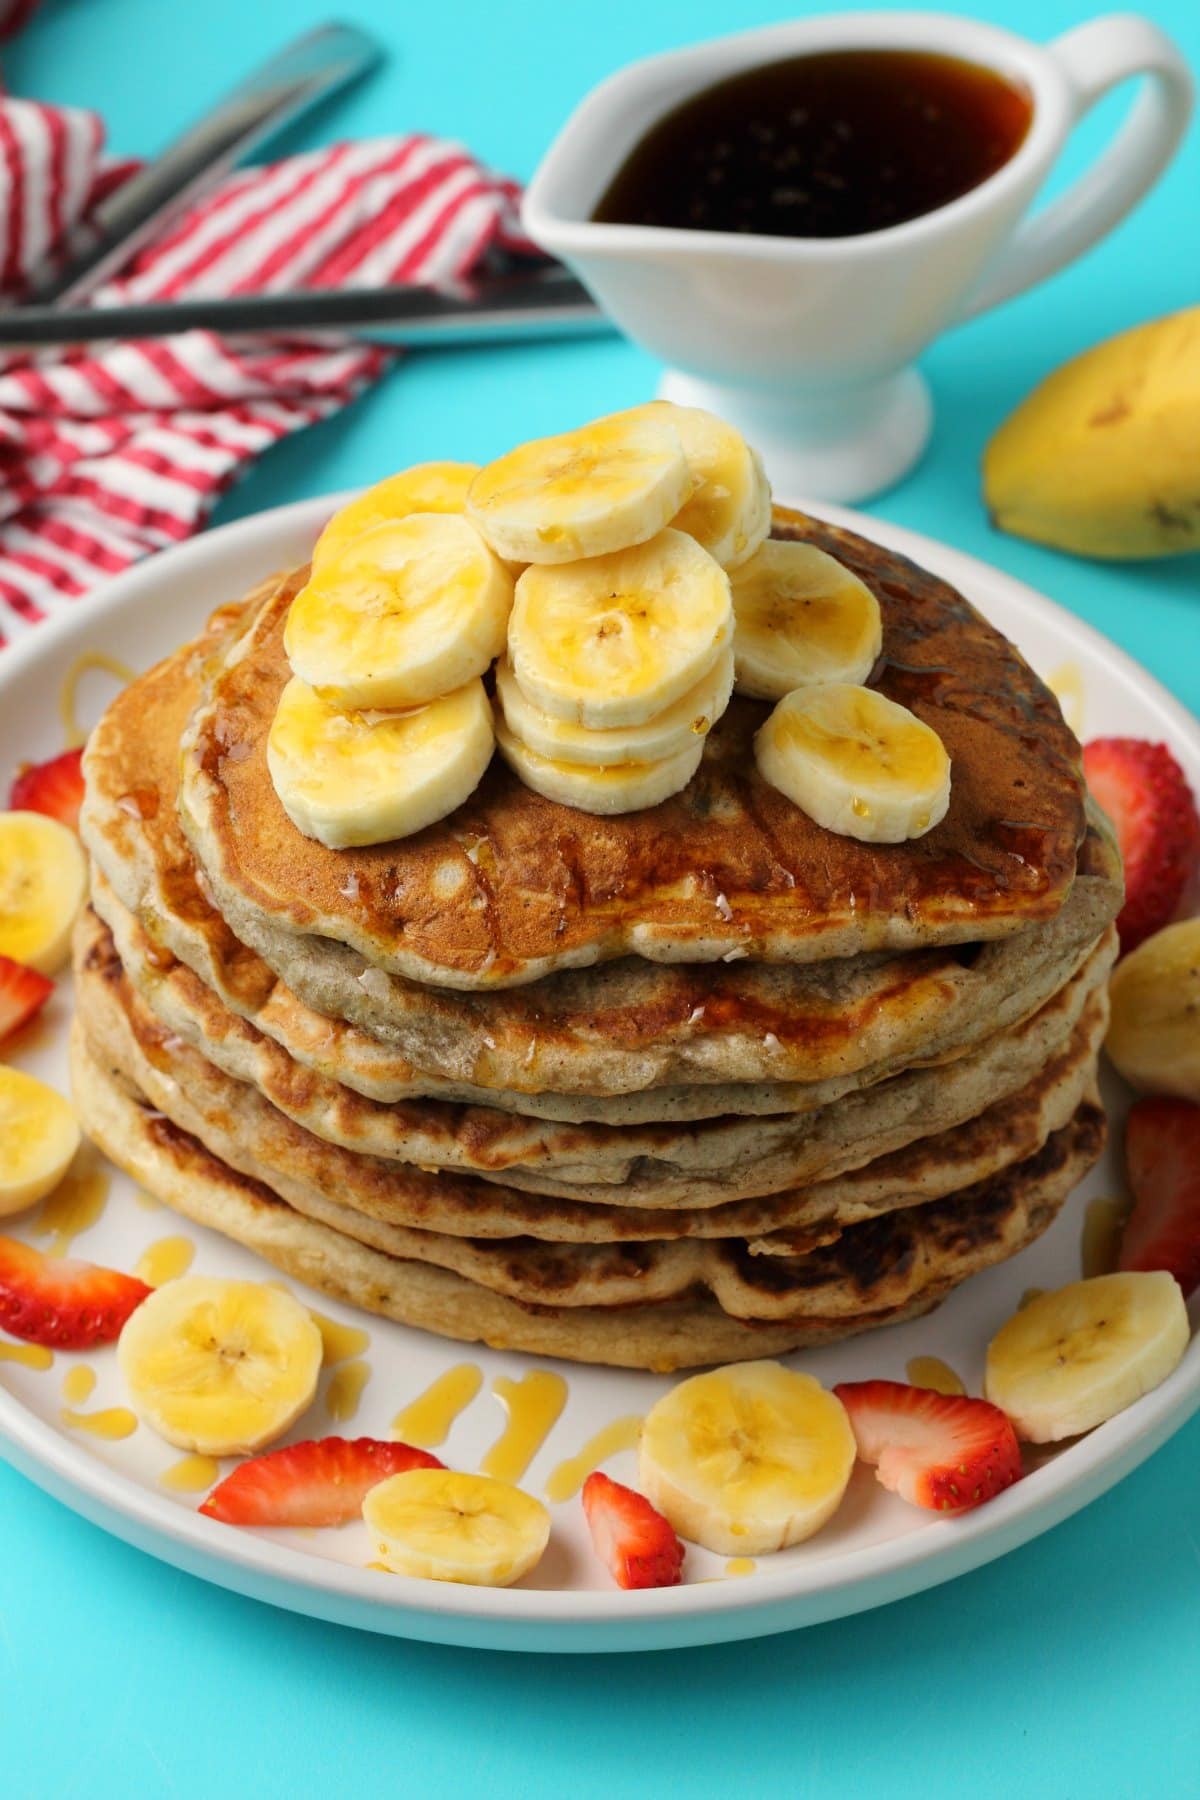 Stack of pancake topped with slices of banana and maple syrup.